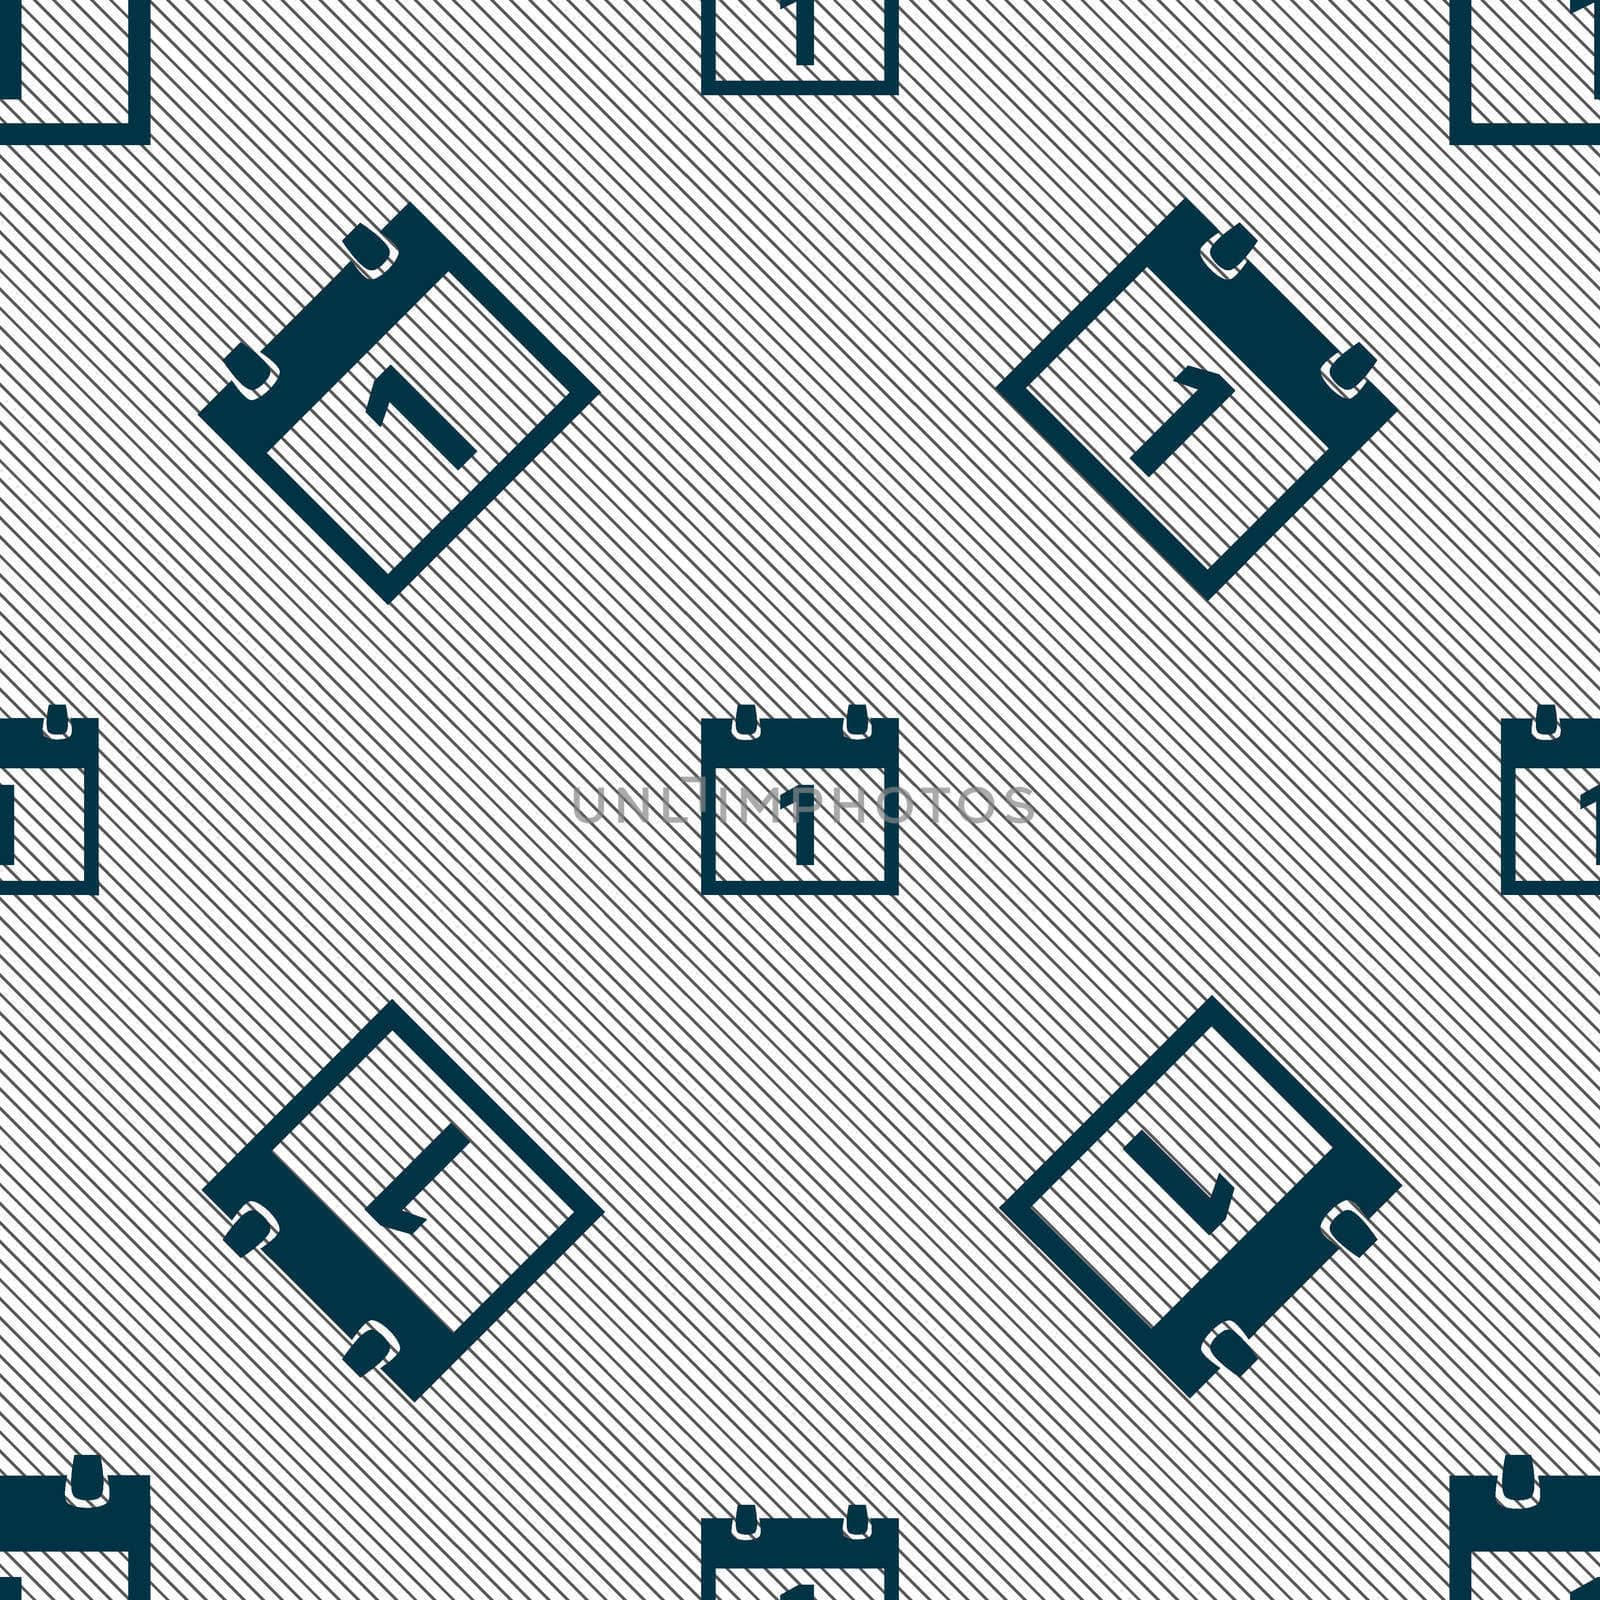 Calendar sign icon. 1 day month symbol. Date button. Seamless pattern with geometric texture.  by serhii_lohvyniuk